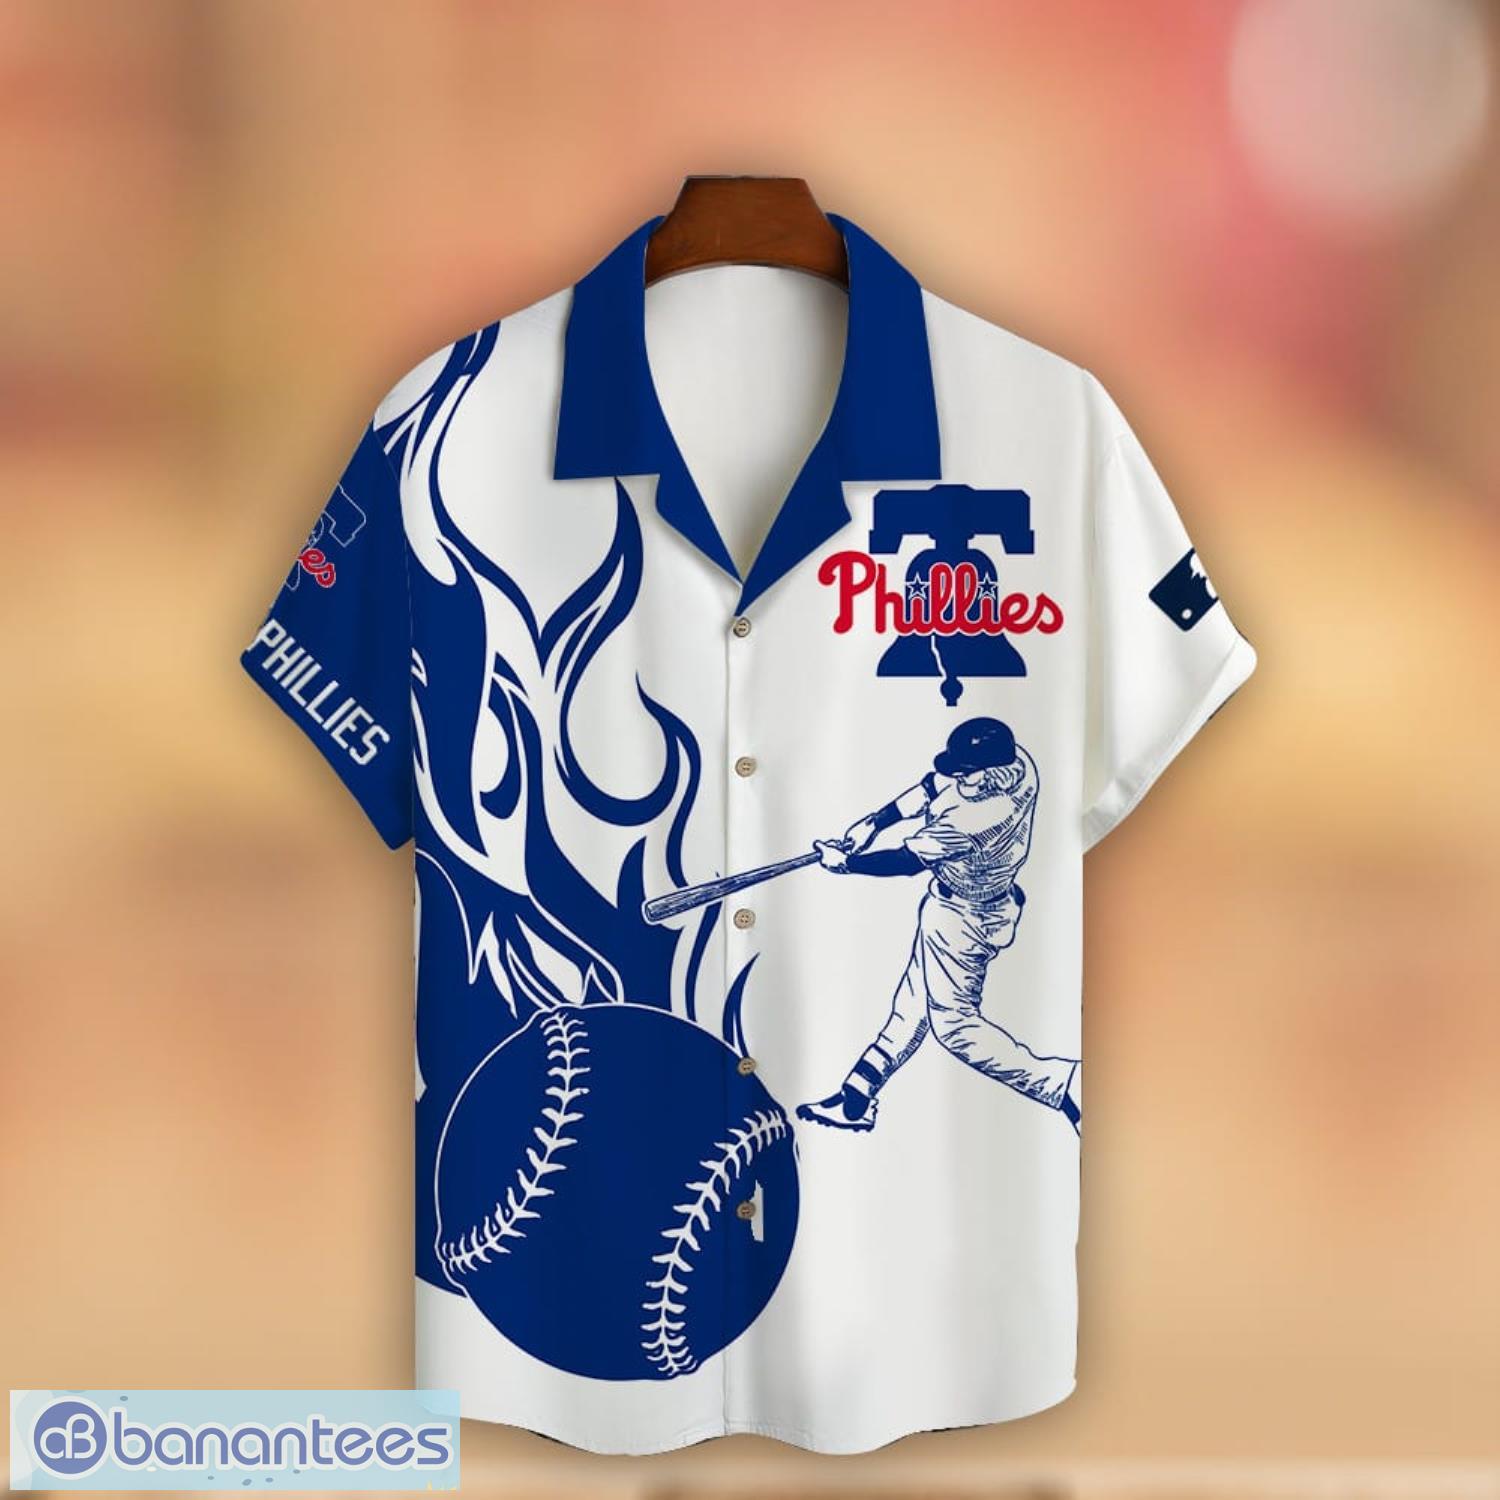 Best Selling Product] Texas Rangers MLB Independence Day Full Print Unisex  Hawaiian Shirt